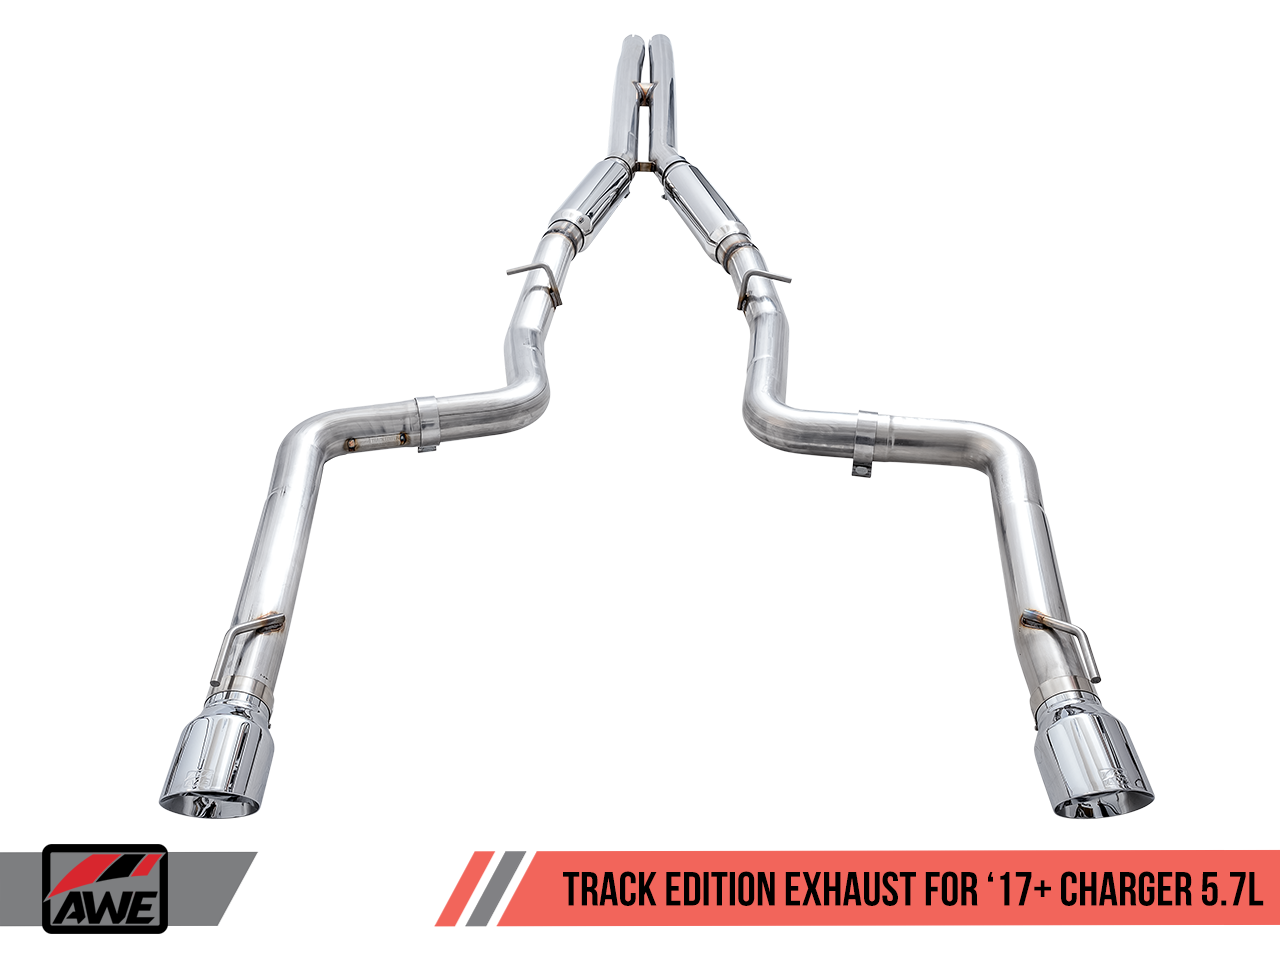 AWE Track Edition Exhaust for 17+ Charger 5.7 - Diamond Black Tips